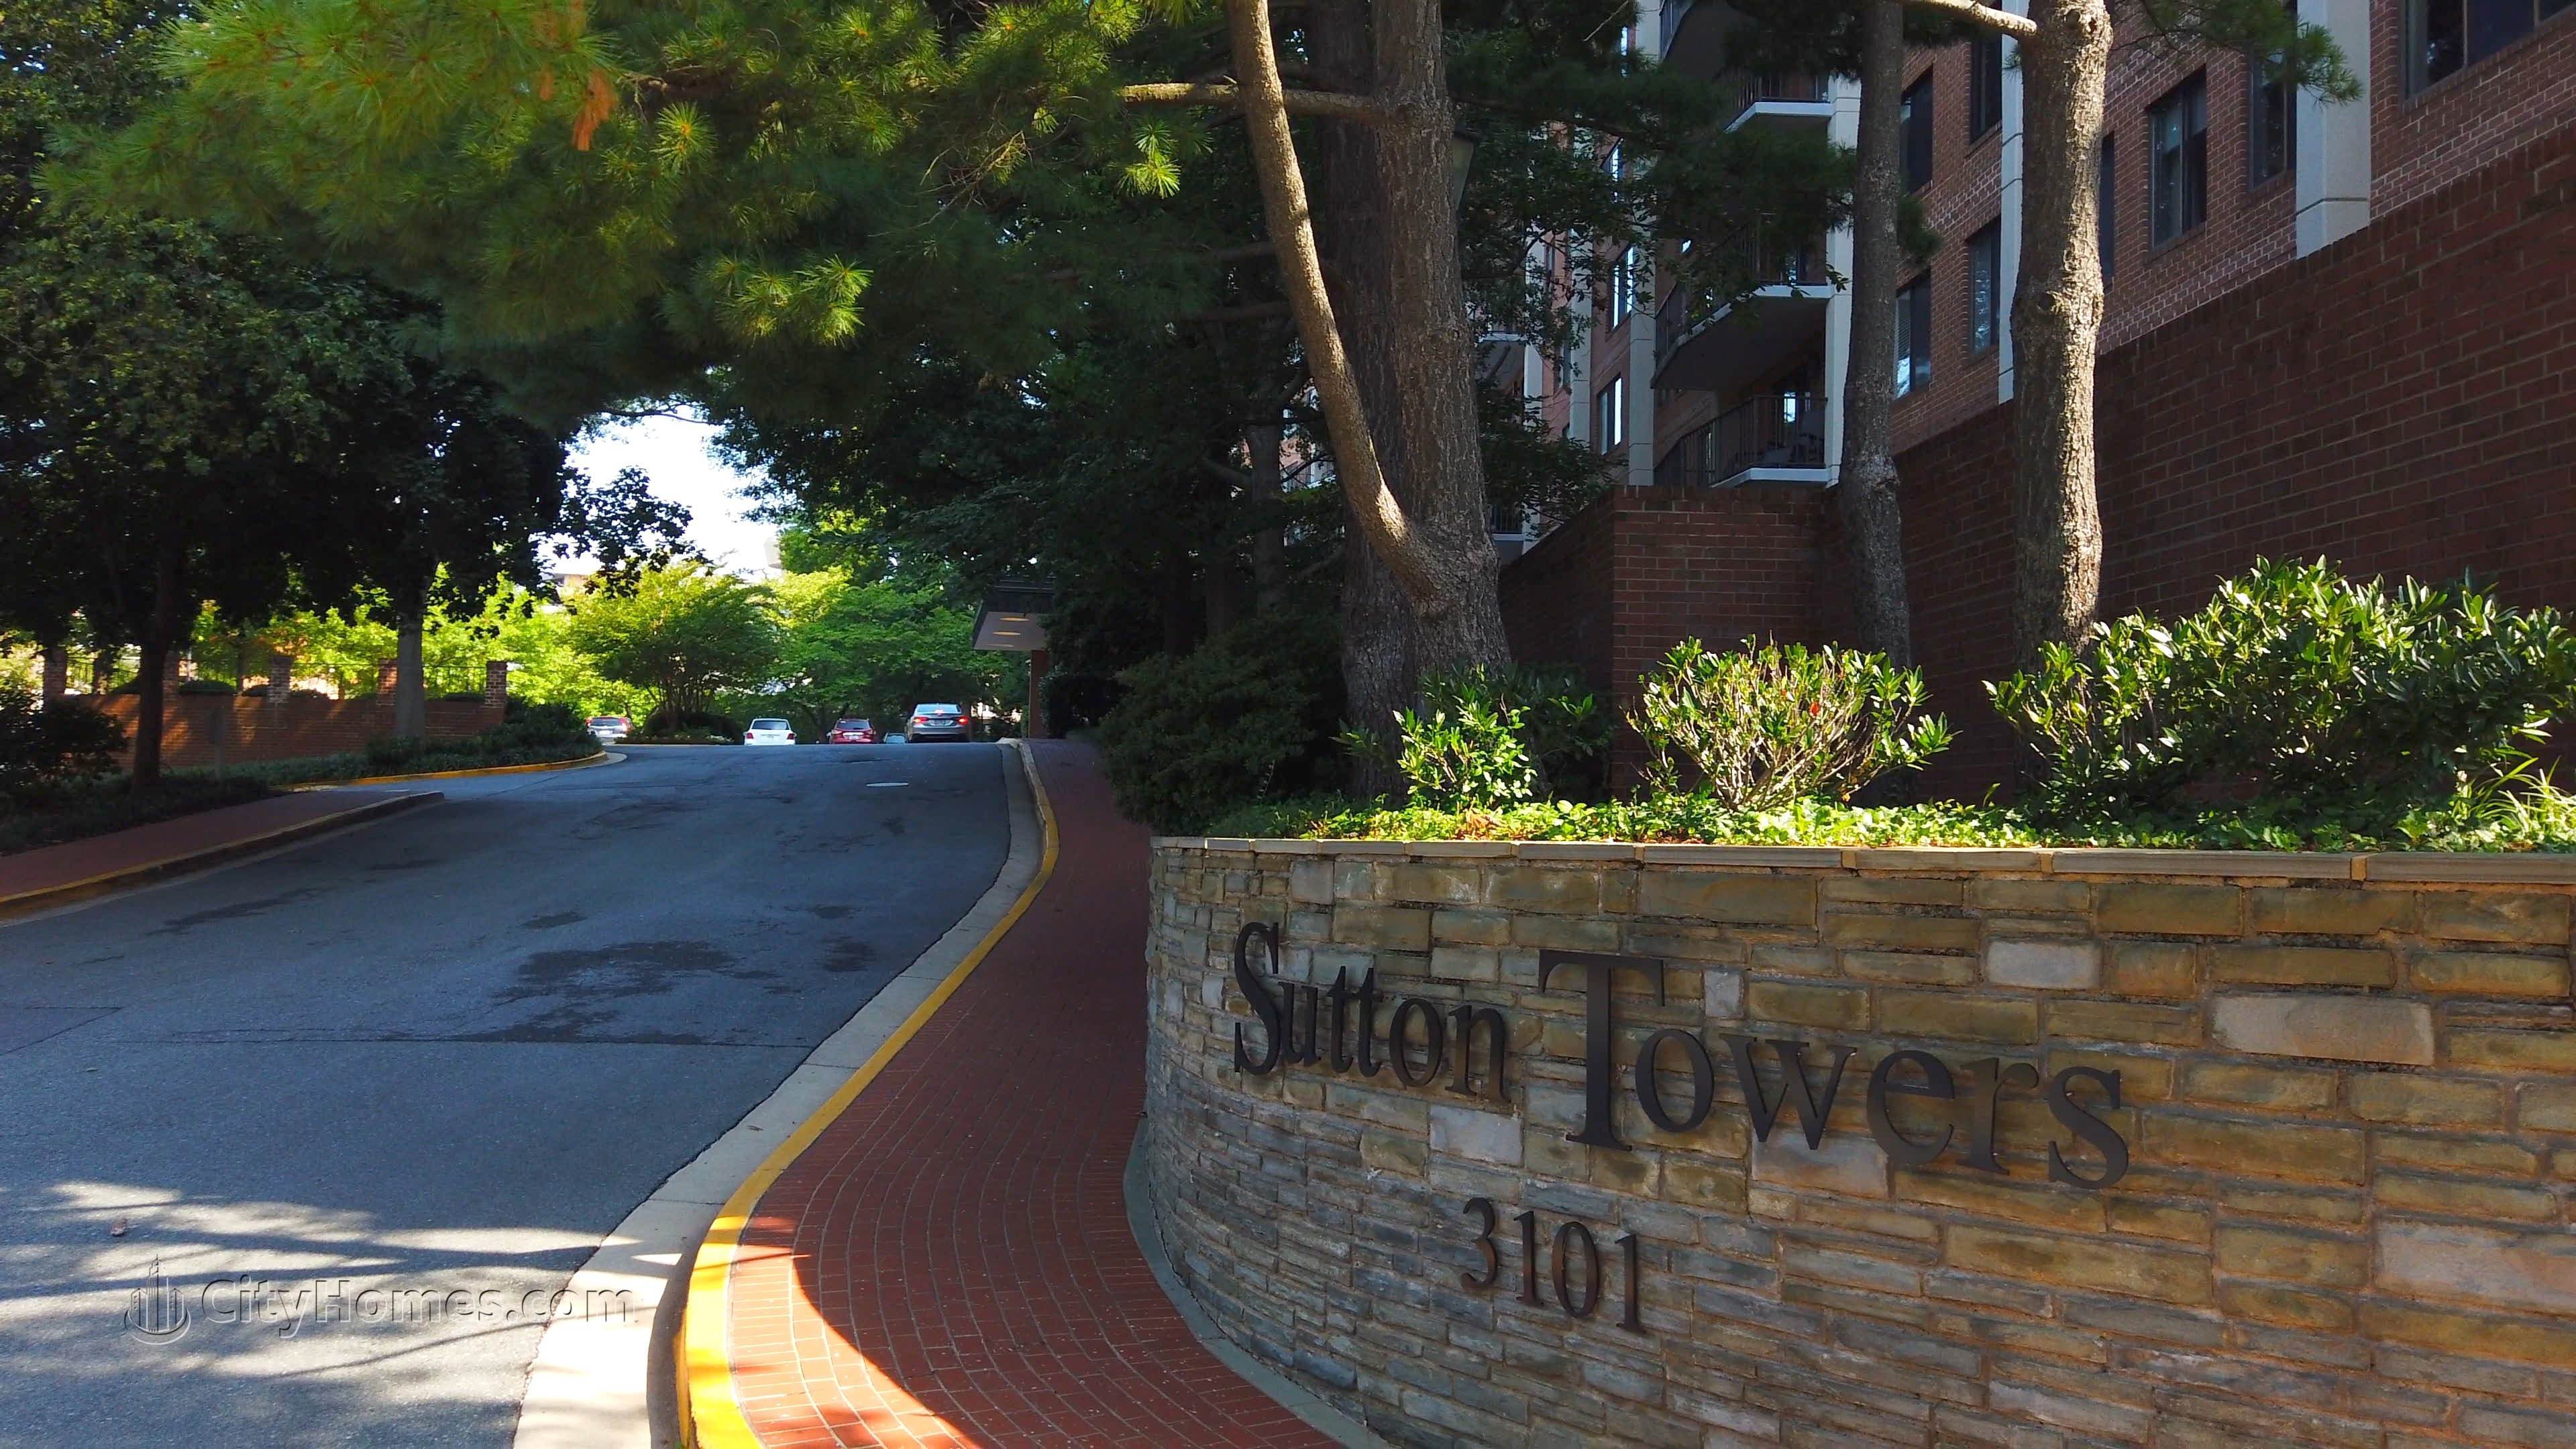 Sutton Towers здание в 3101 New Mexico Ave NW, Wesley Heights, Washington, DC 20016